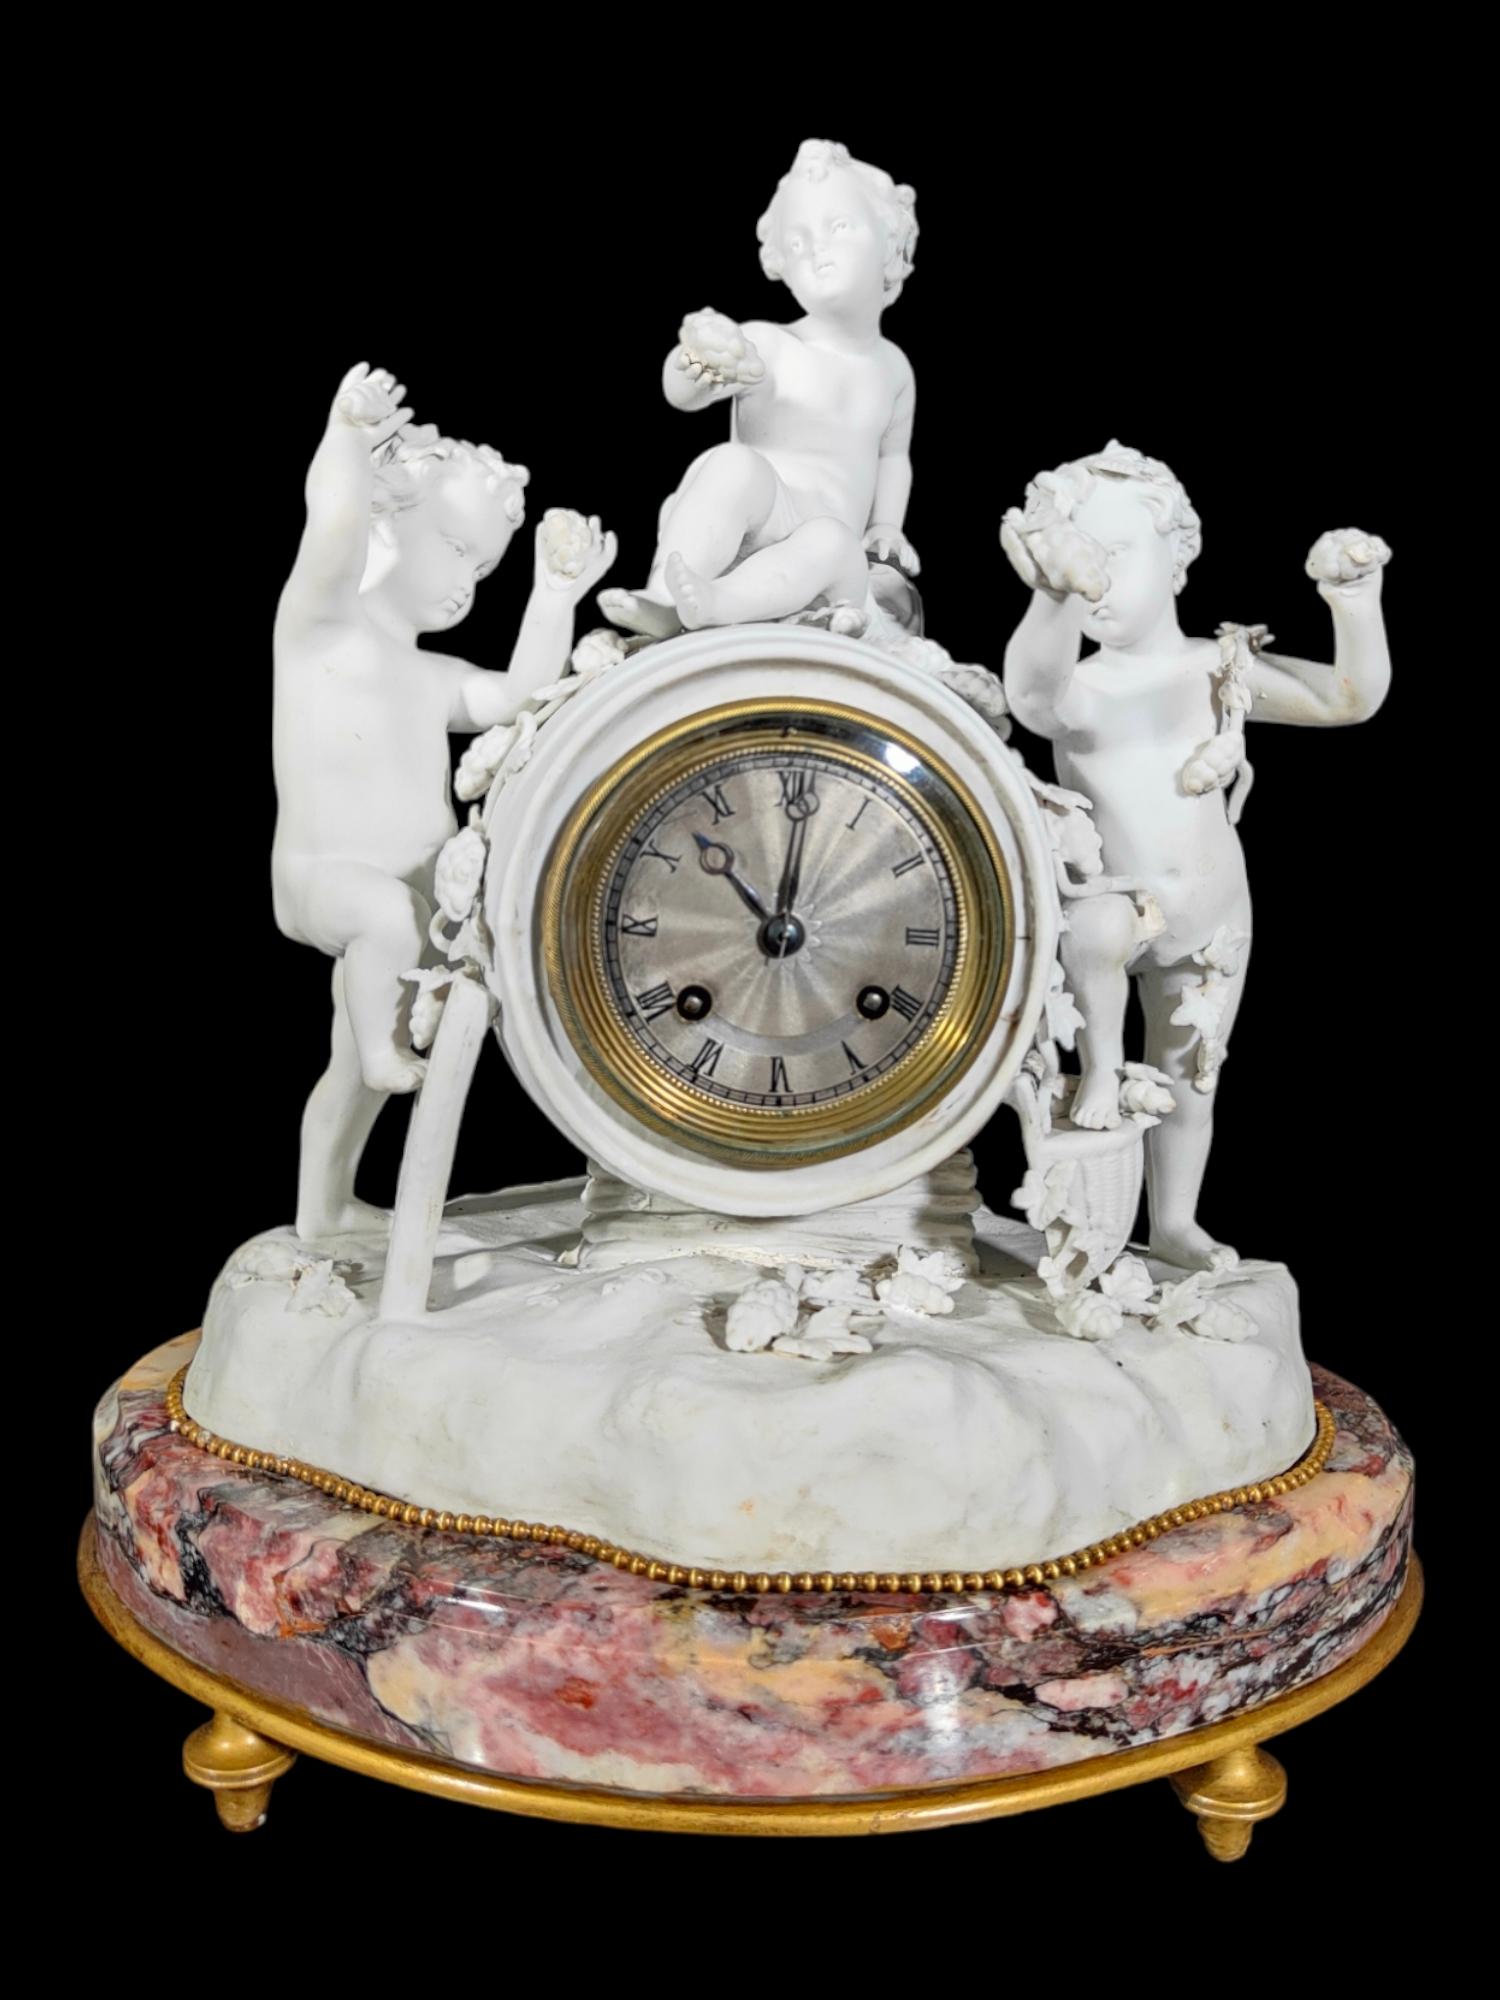 Porcelain clock by Le Roy Et Fills A Paris
Elegant porcelain clock from the beginning of 1800 with a wine allegory scene. It is in working condition. It has its pendulum and original key. Measures: 38x33x25cm